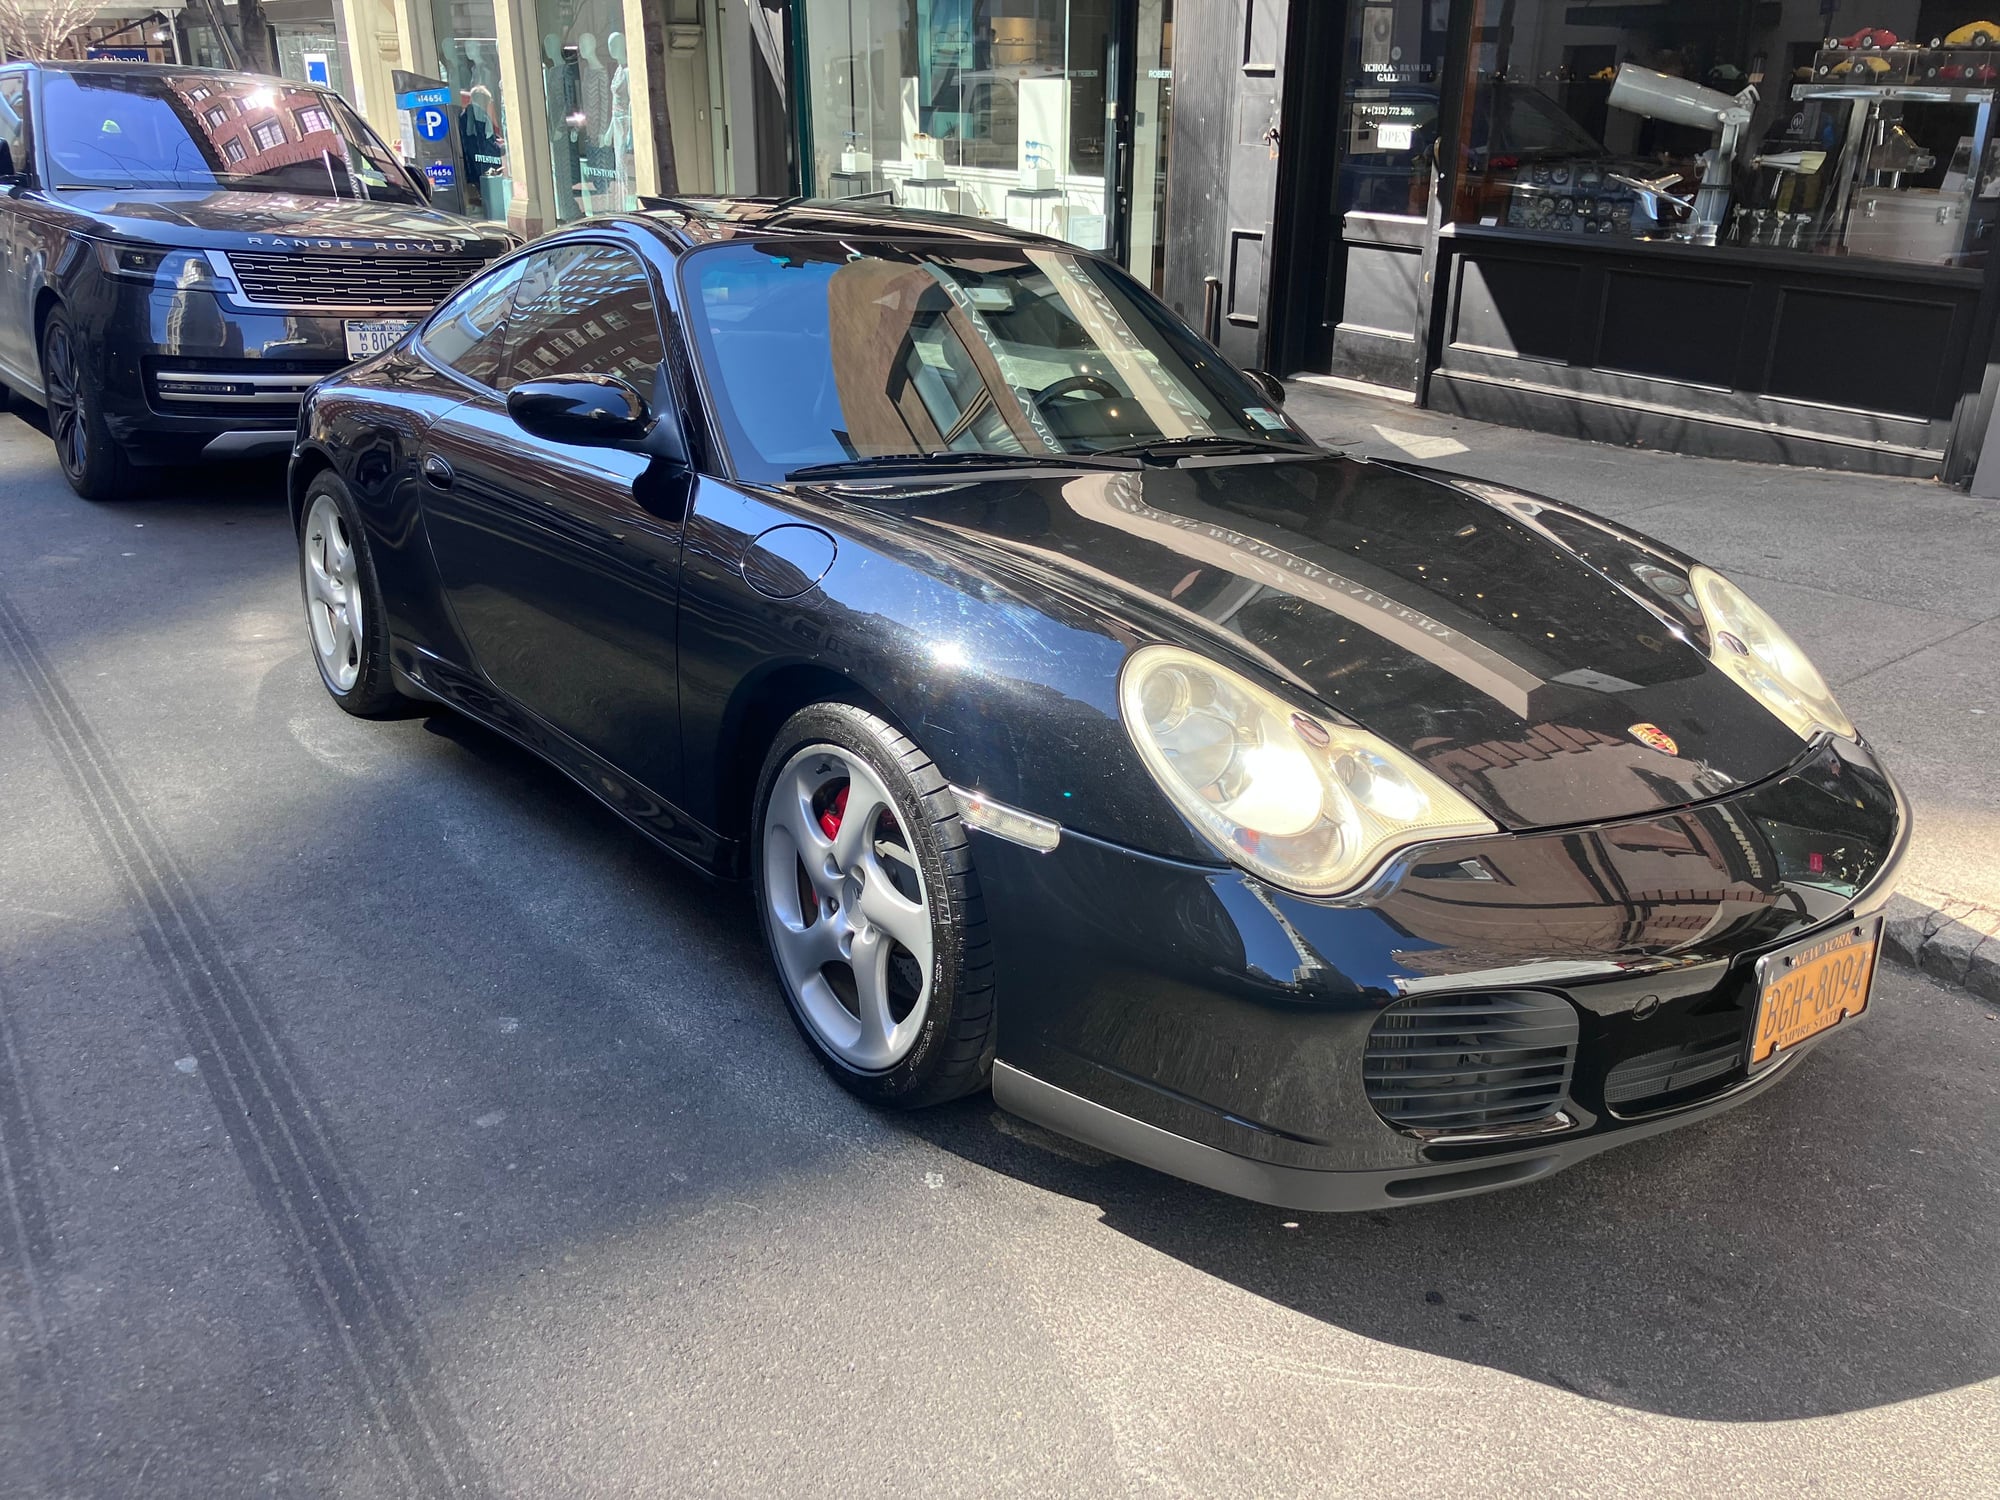 2002 Porsche 911 - 2002 C4S - one owner - Used - VIN WPOAA299825623436 - 199,600 Miles - Manual - Coupe - Black - New York City, NY 10024, United States